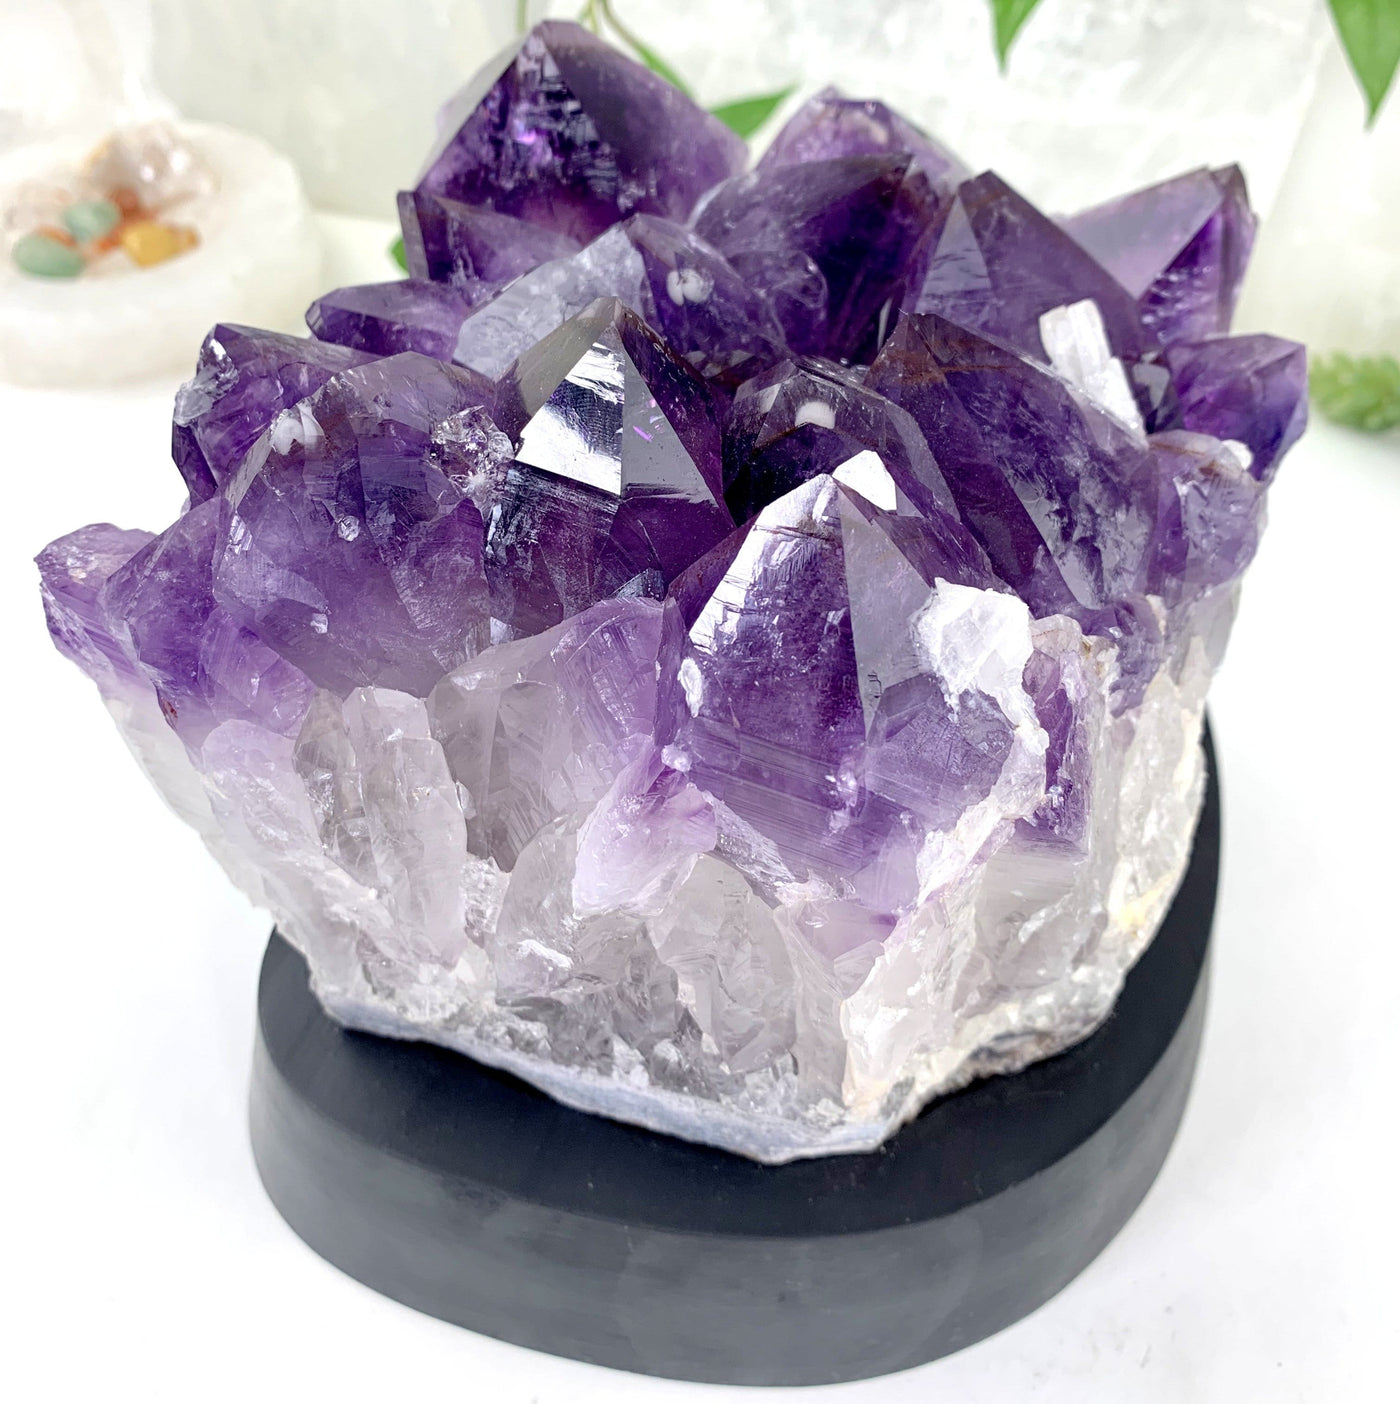 amethyst Cluster with Calcite Formations on Wood Base  with decorations in the background